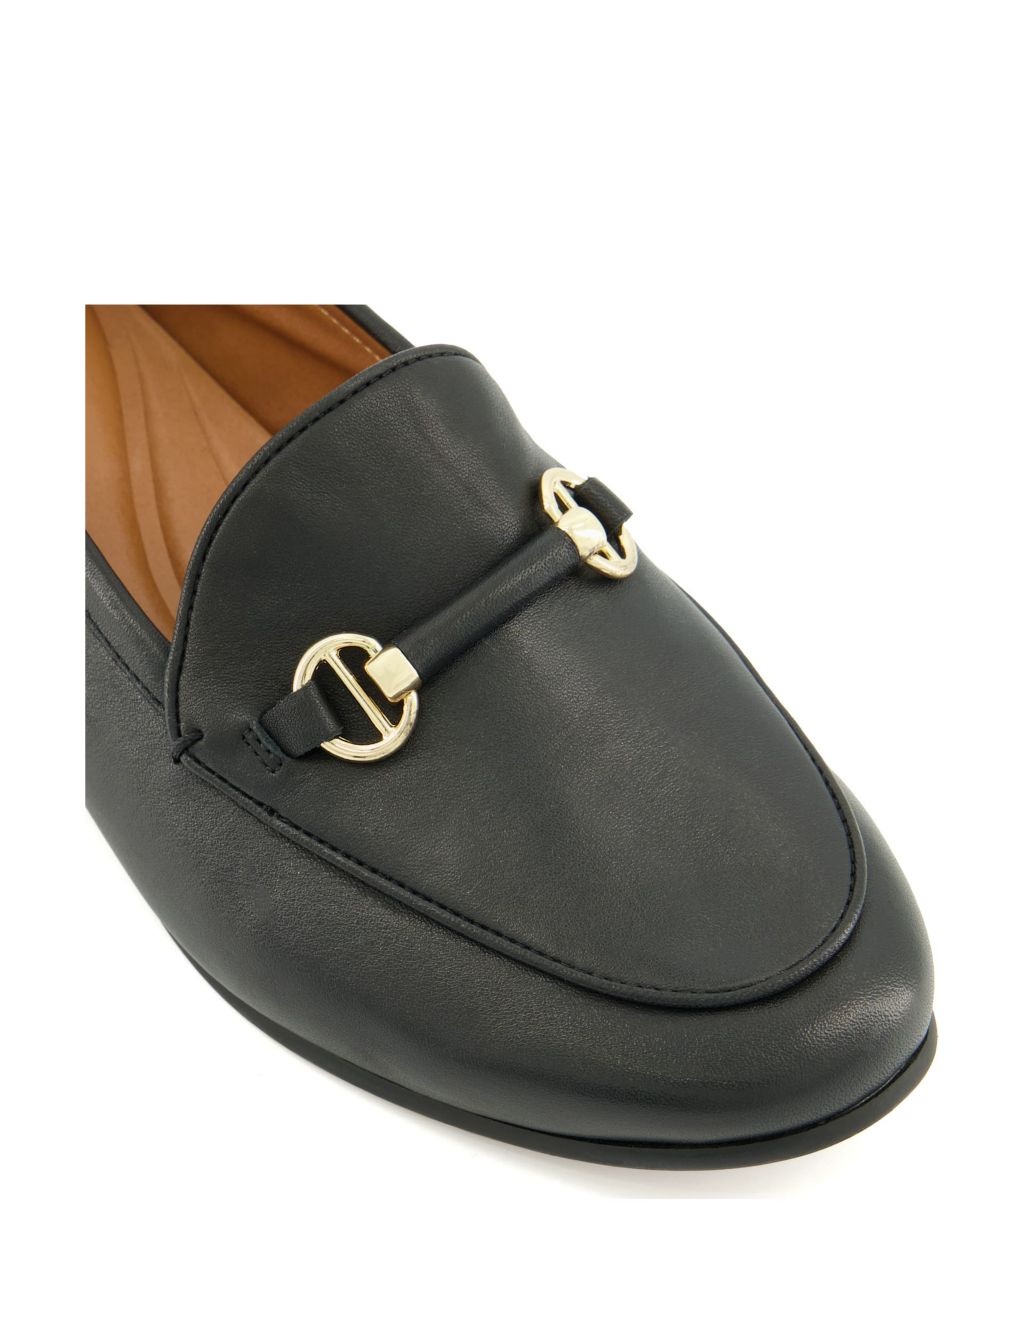 Leather Bar Trim Flat Loafers image 5